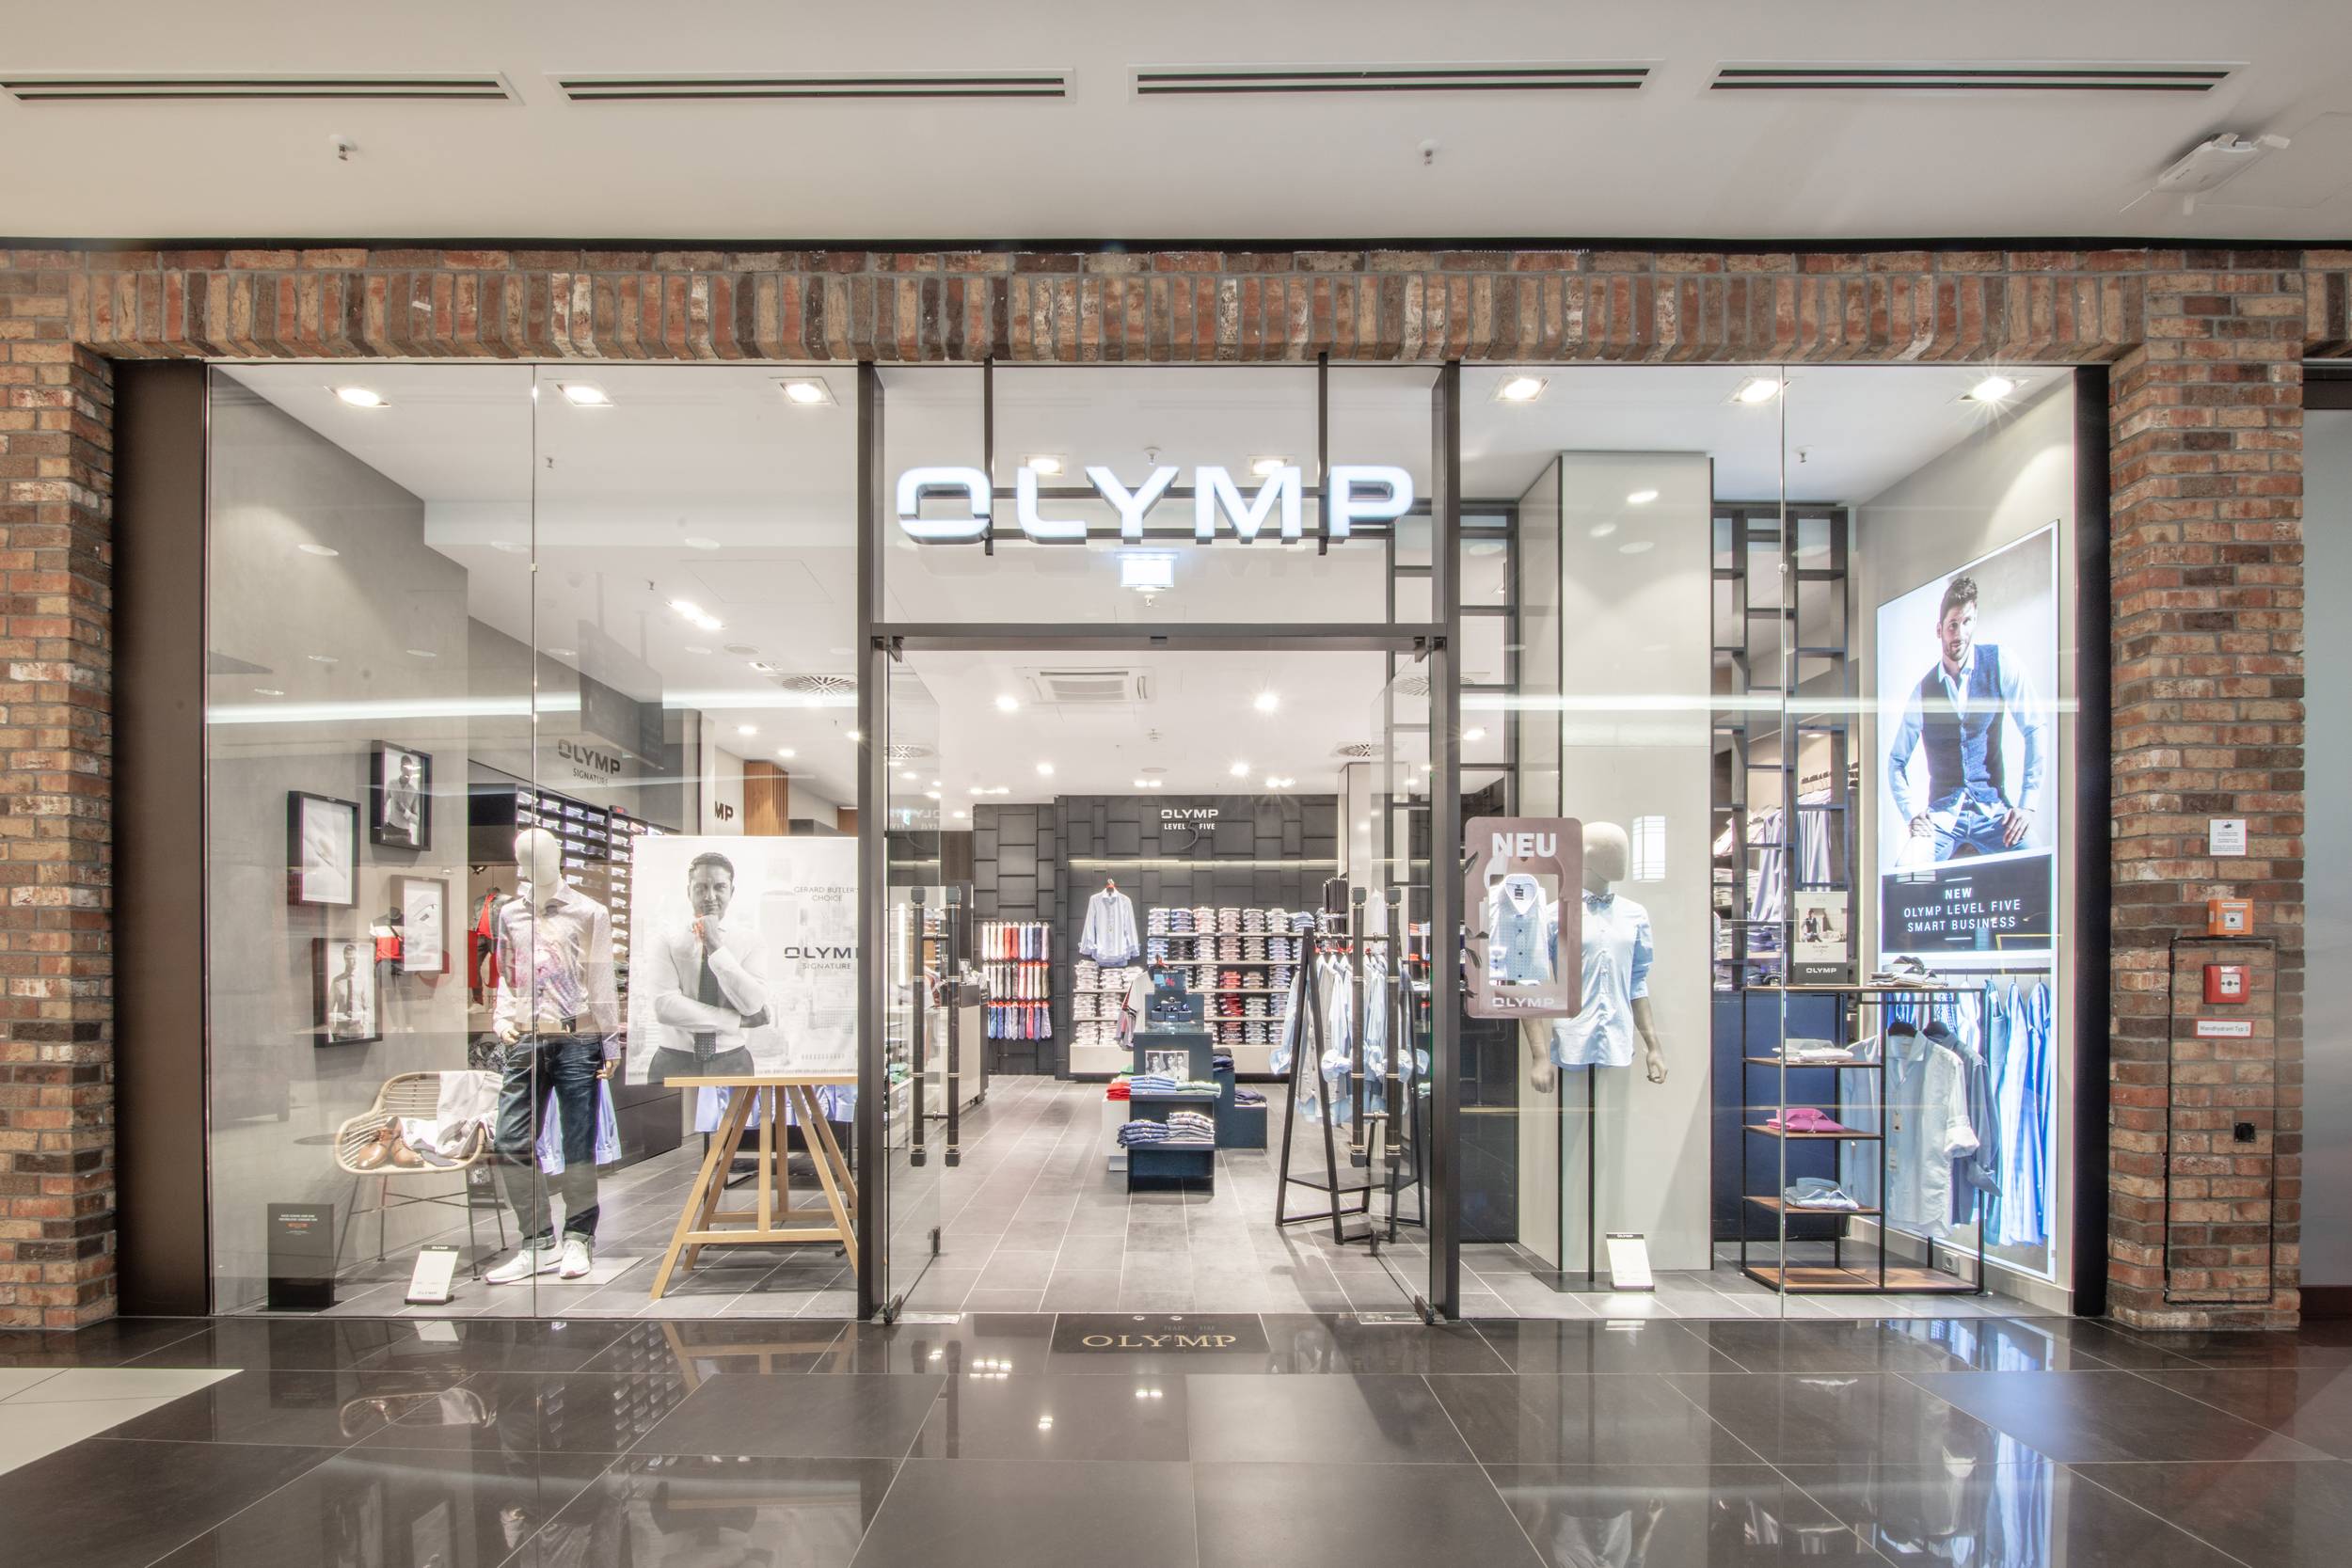 OLYMP at the Mall of Berlin